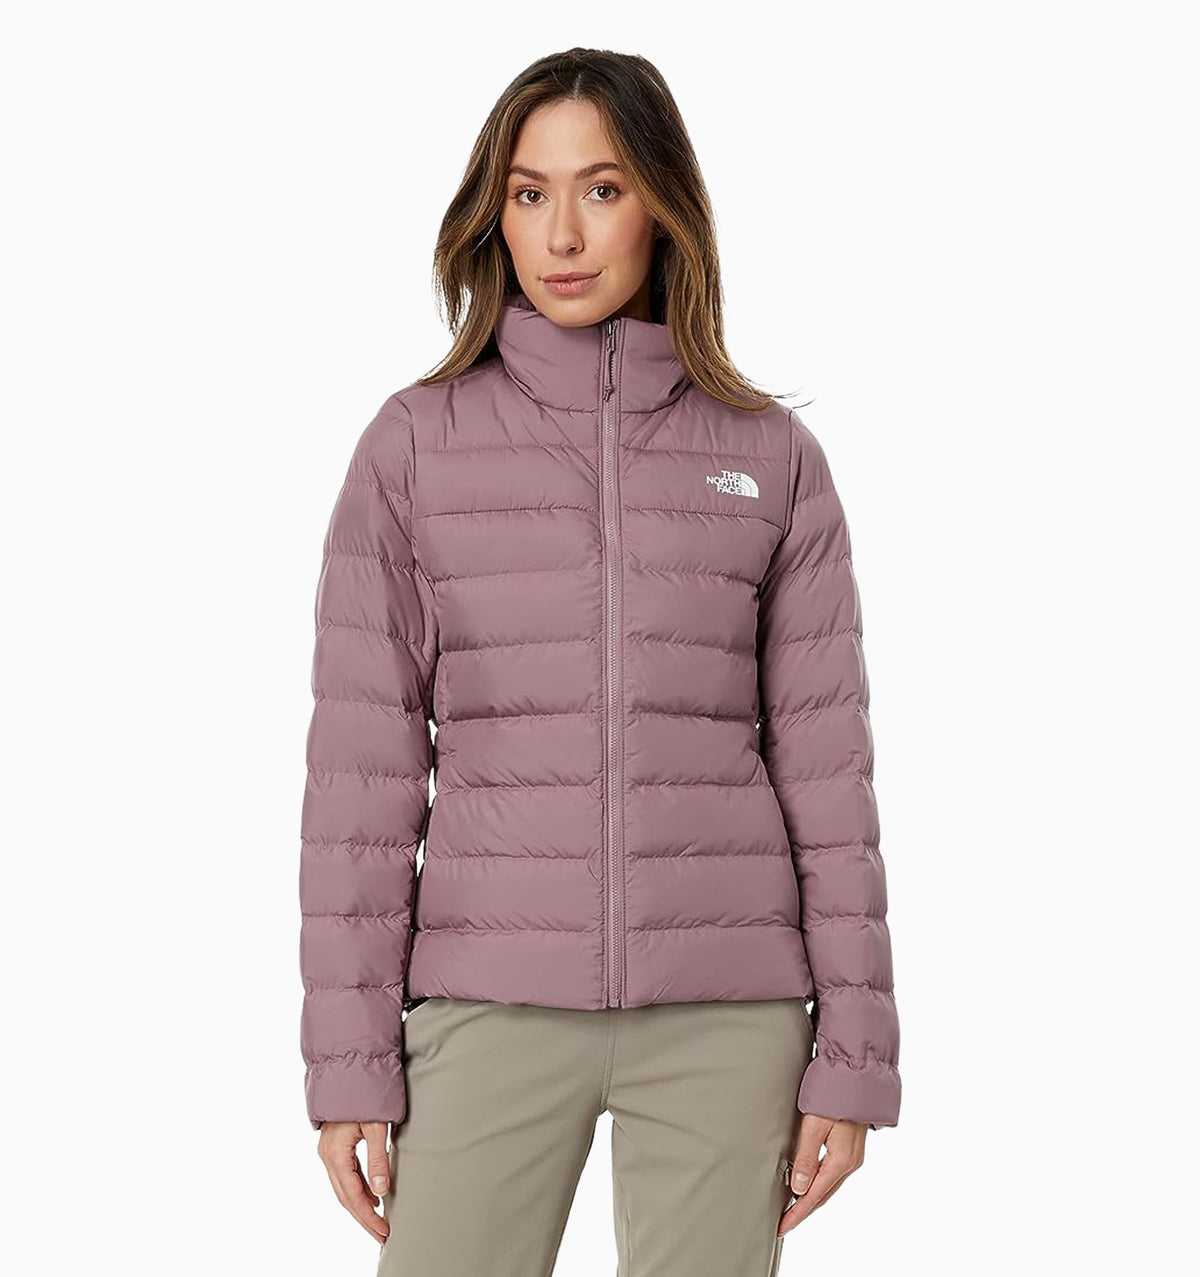 The North Face Women’s Aconcagua 3 Jacket - Fawn Grey